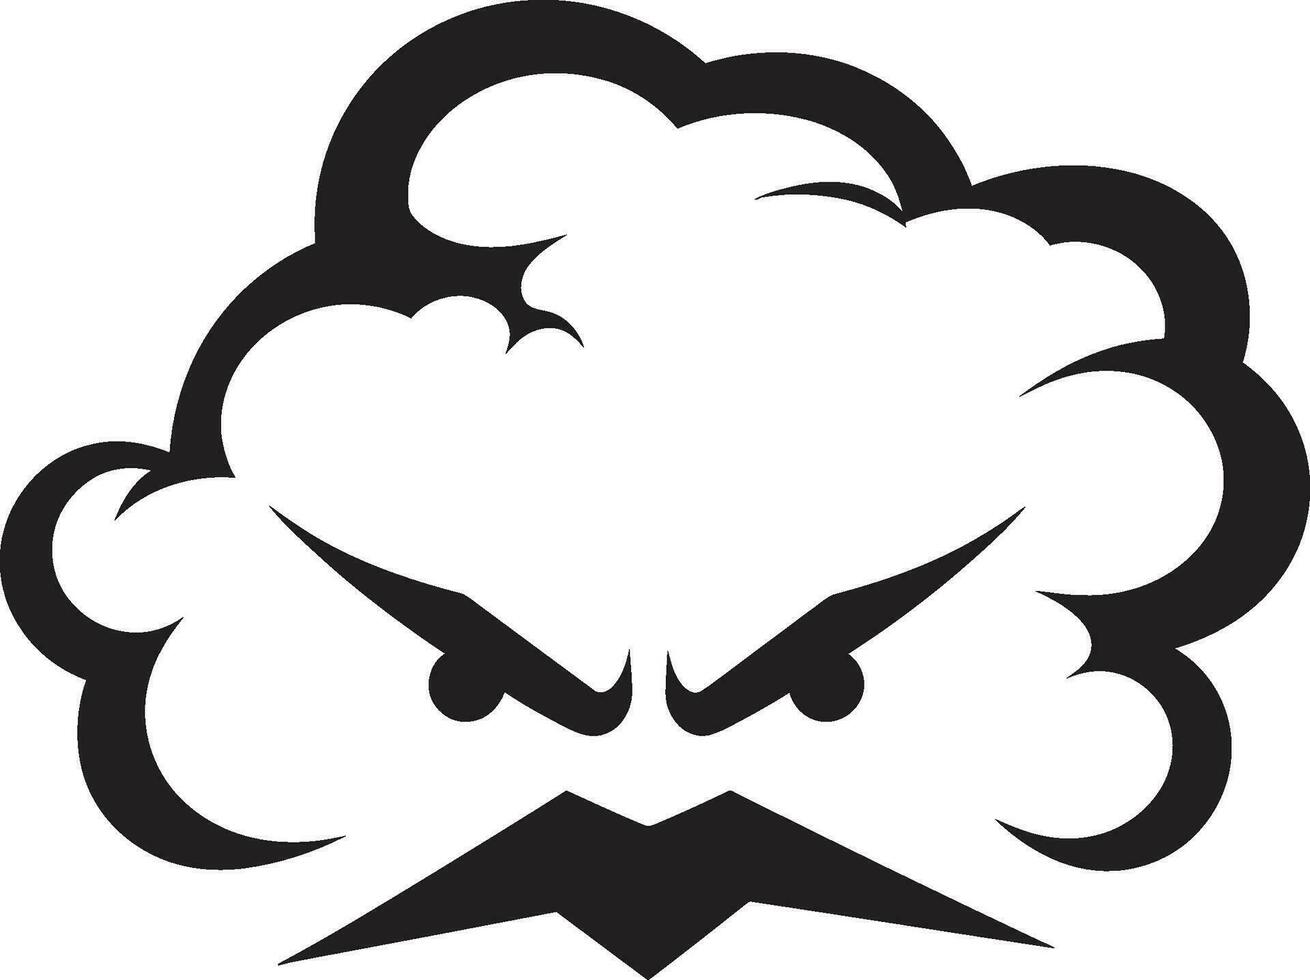 Tempest Rage Angry Vector Cloud Emblem Furious Squall Black Cartoon Cloud Character